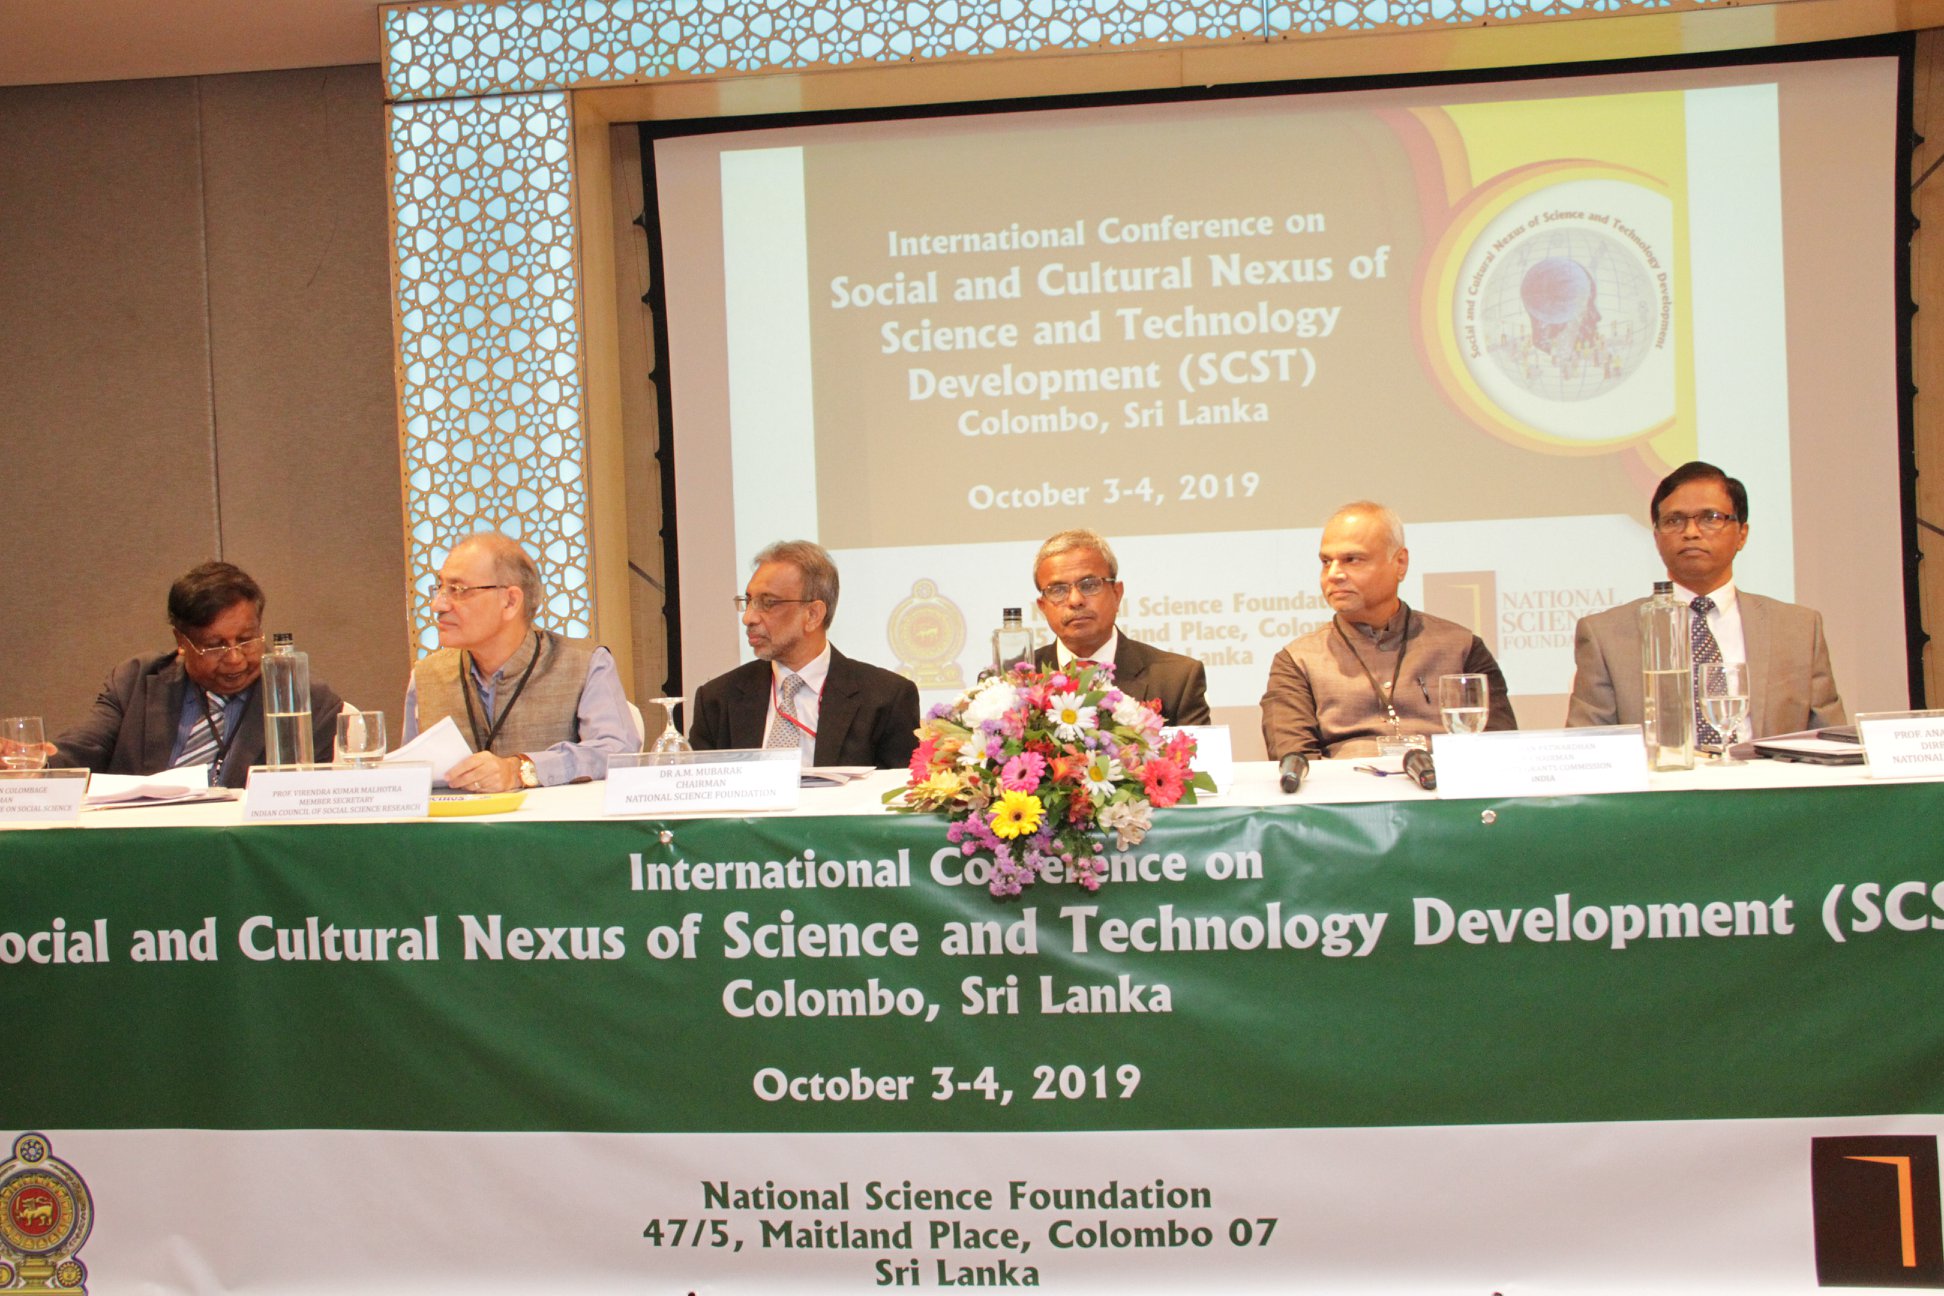 Social and Cultural Nexus of Science and Technology Development Conference